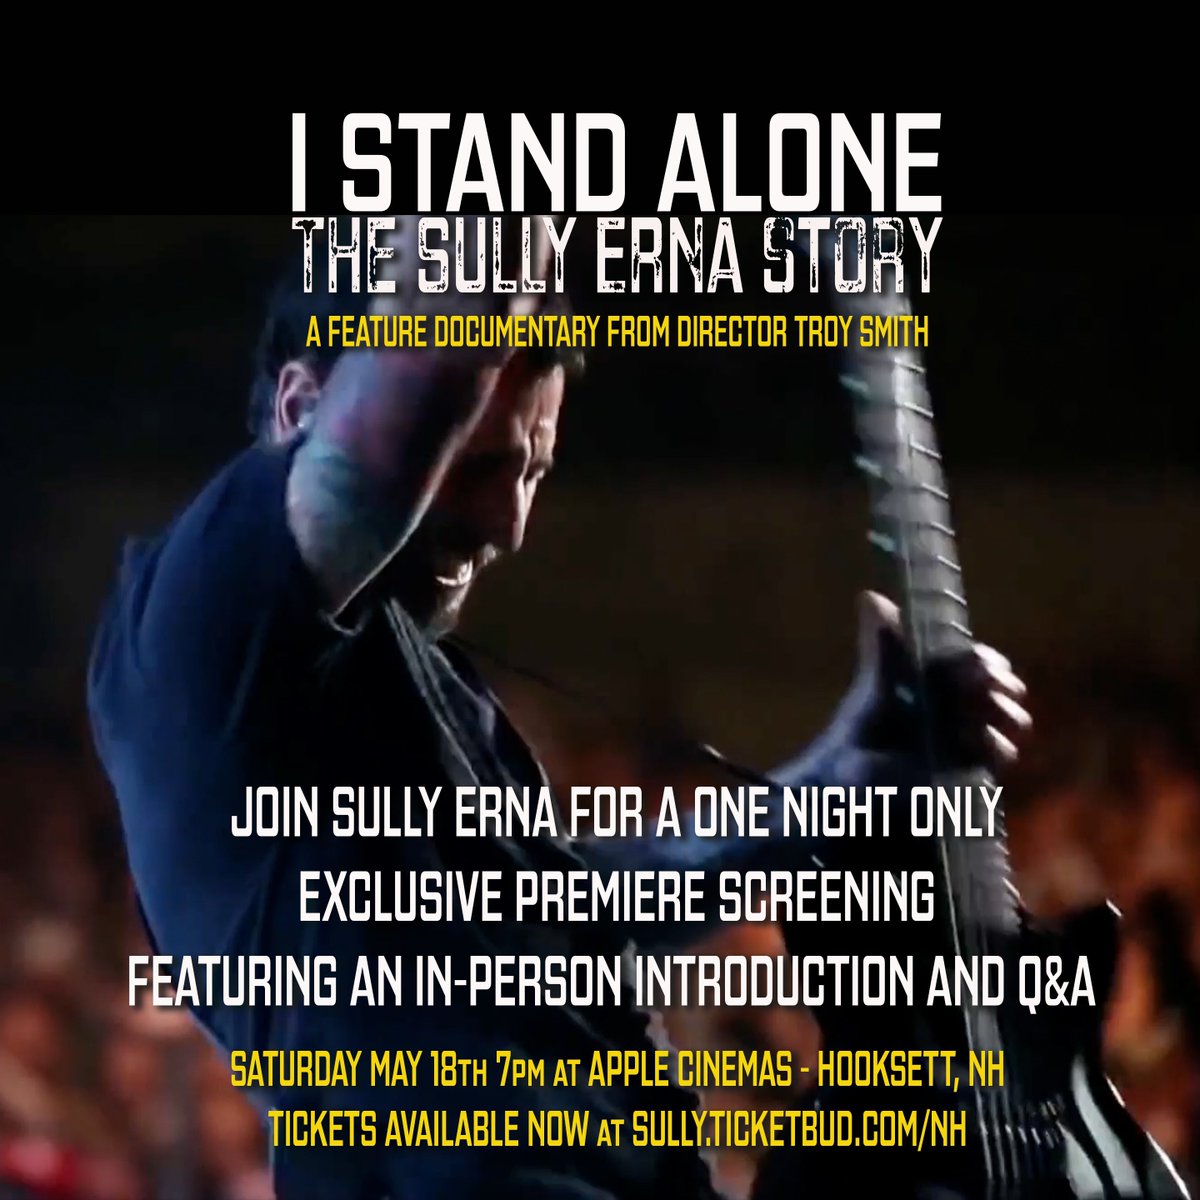 📽️🍿NEW HAMPSHIRE There will be a SPECIAL New England SCREENING of “I Stand Alone” the @SullyErna story on SATURDAY MAY 18 at 7:00PM at @AppleCinemas in Hooksett with a SPECIAL APPEARANCE by Sully Erna for an introduction and Q&A following the screening! 🎟️ Tickets can be…